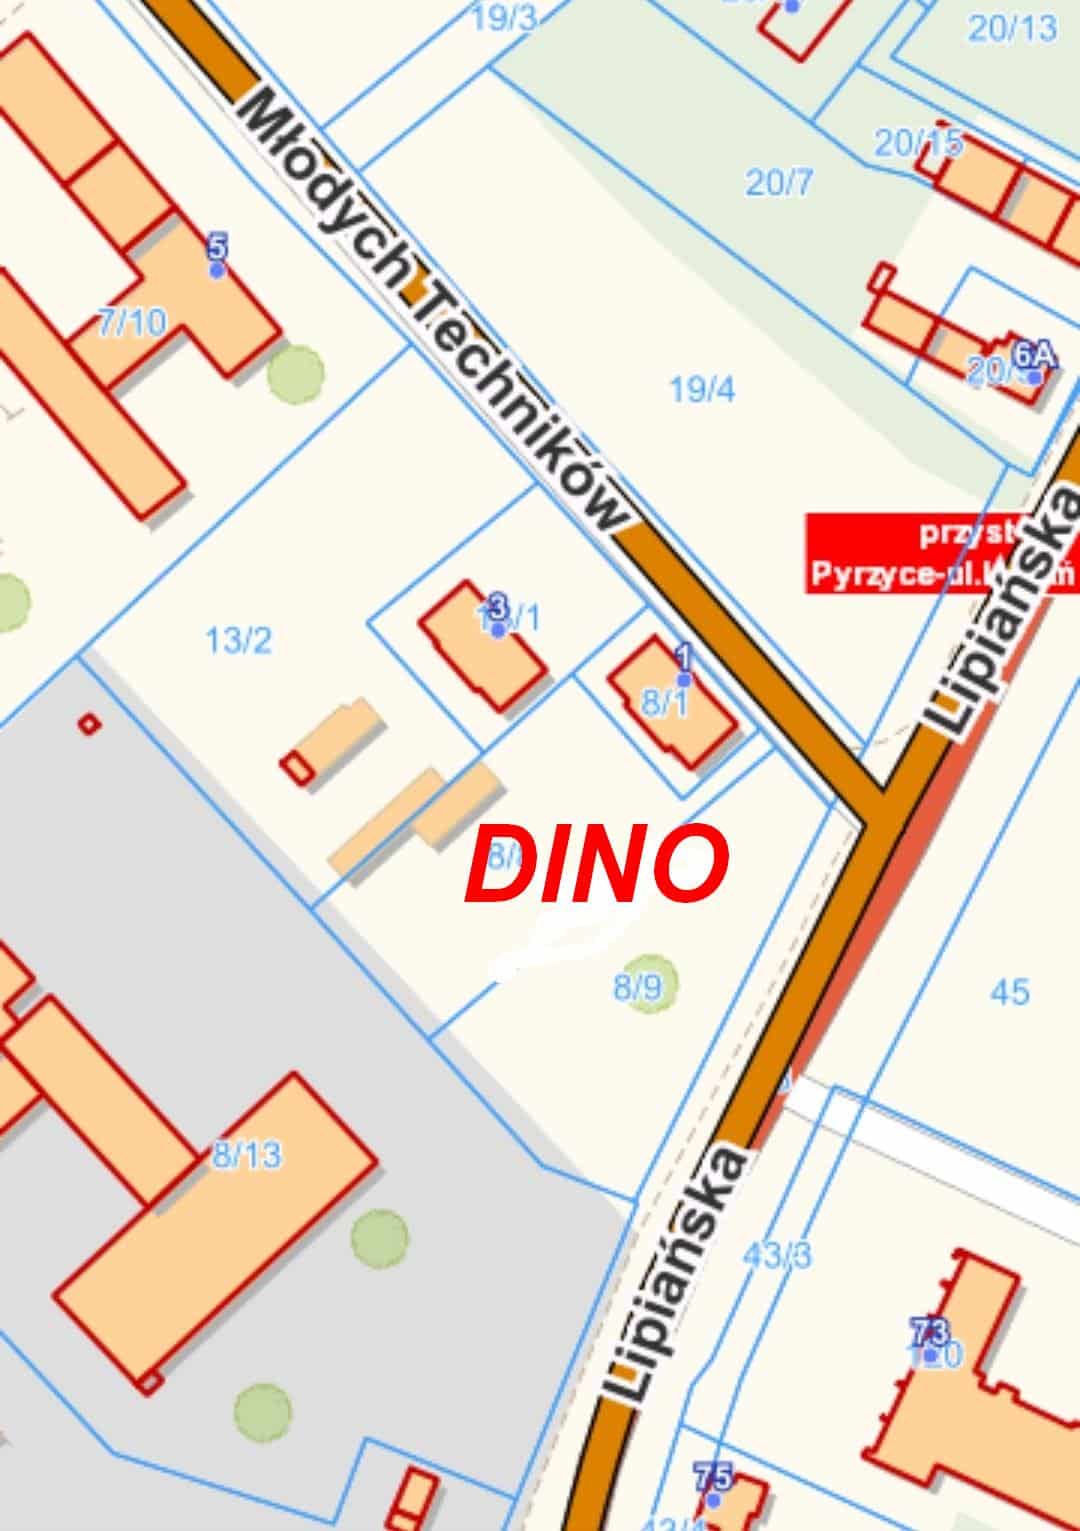 You are currently viewing Nowe DINO w Pyrzycach